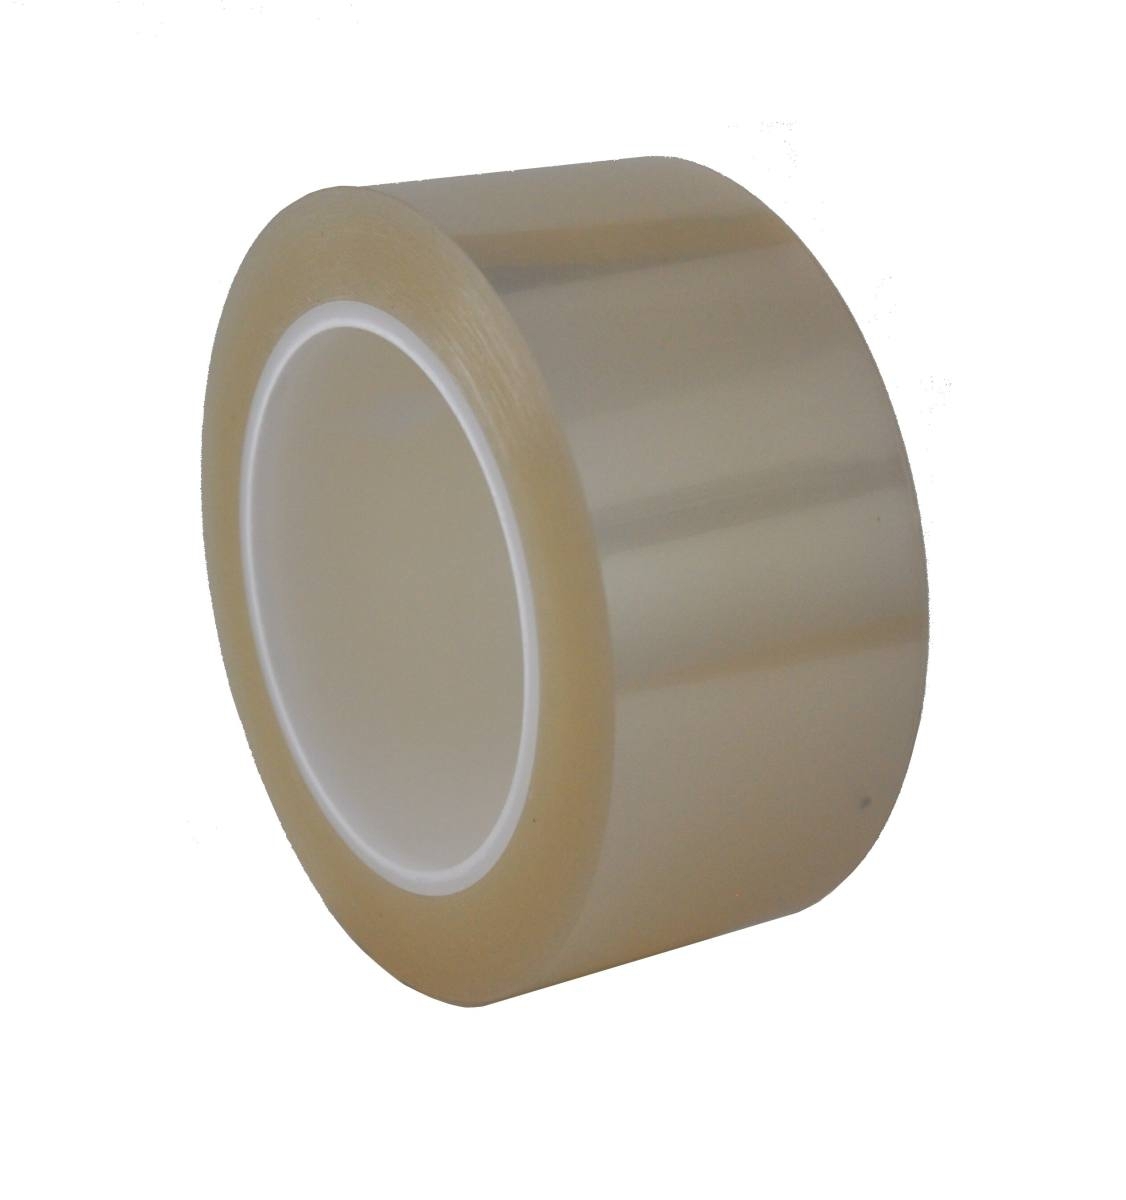 SKS fluorosilicone film, polyester film 0.075mm, 450mmx100m, coated on one side with fluorosilicone, transparent